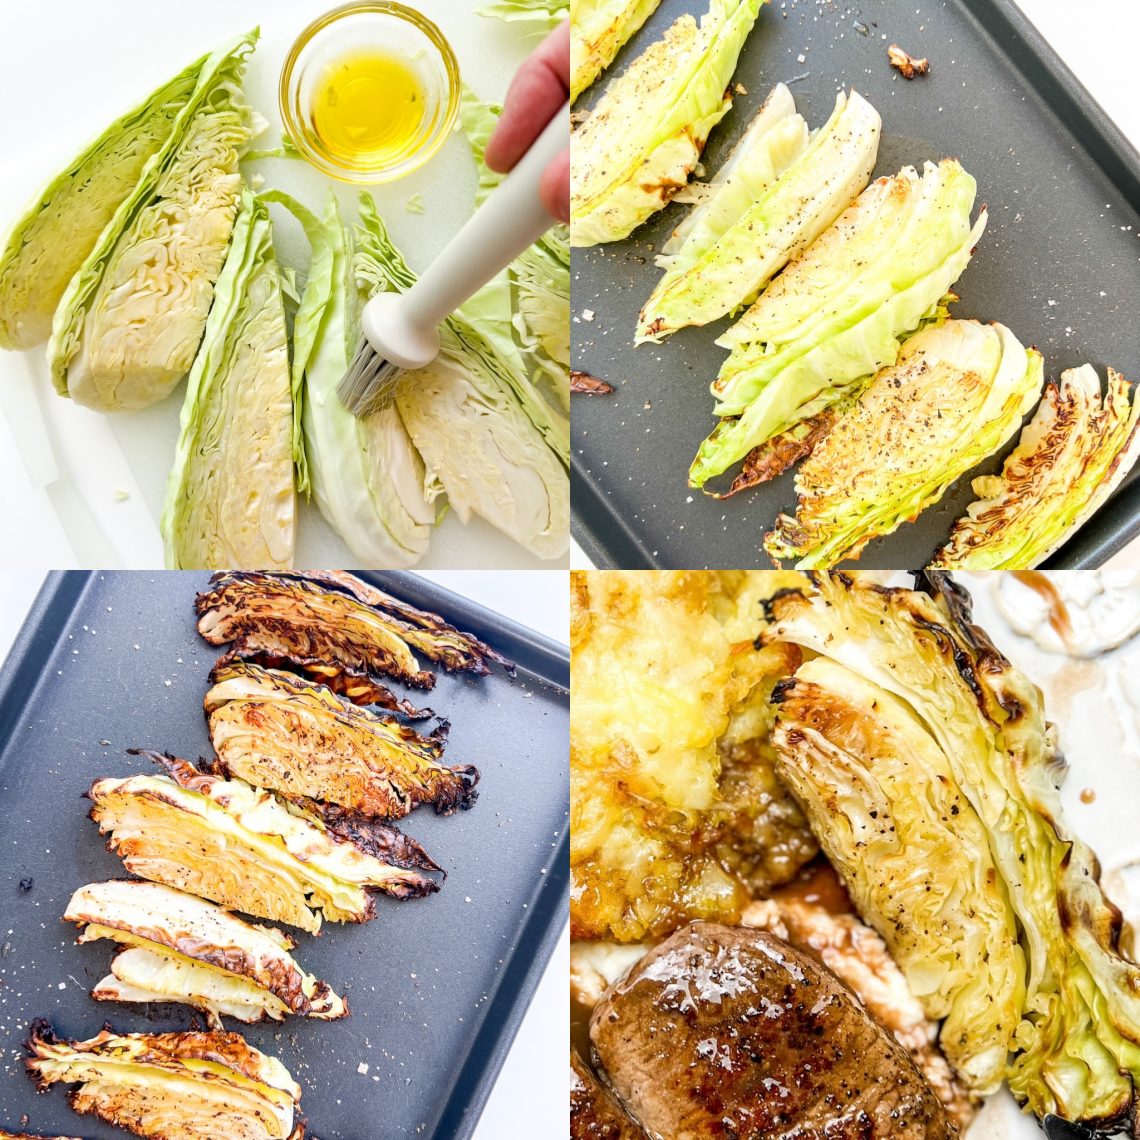 Photograph of Roast Pointed Cabbage